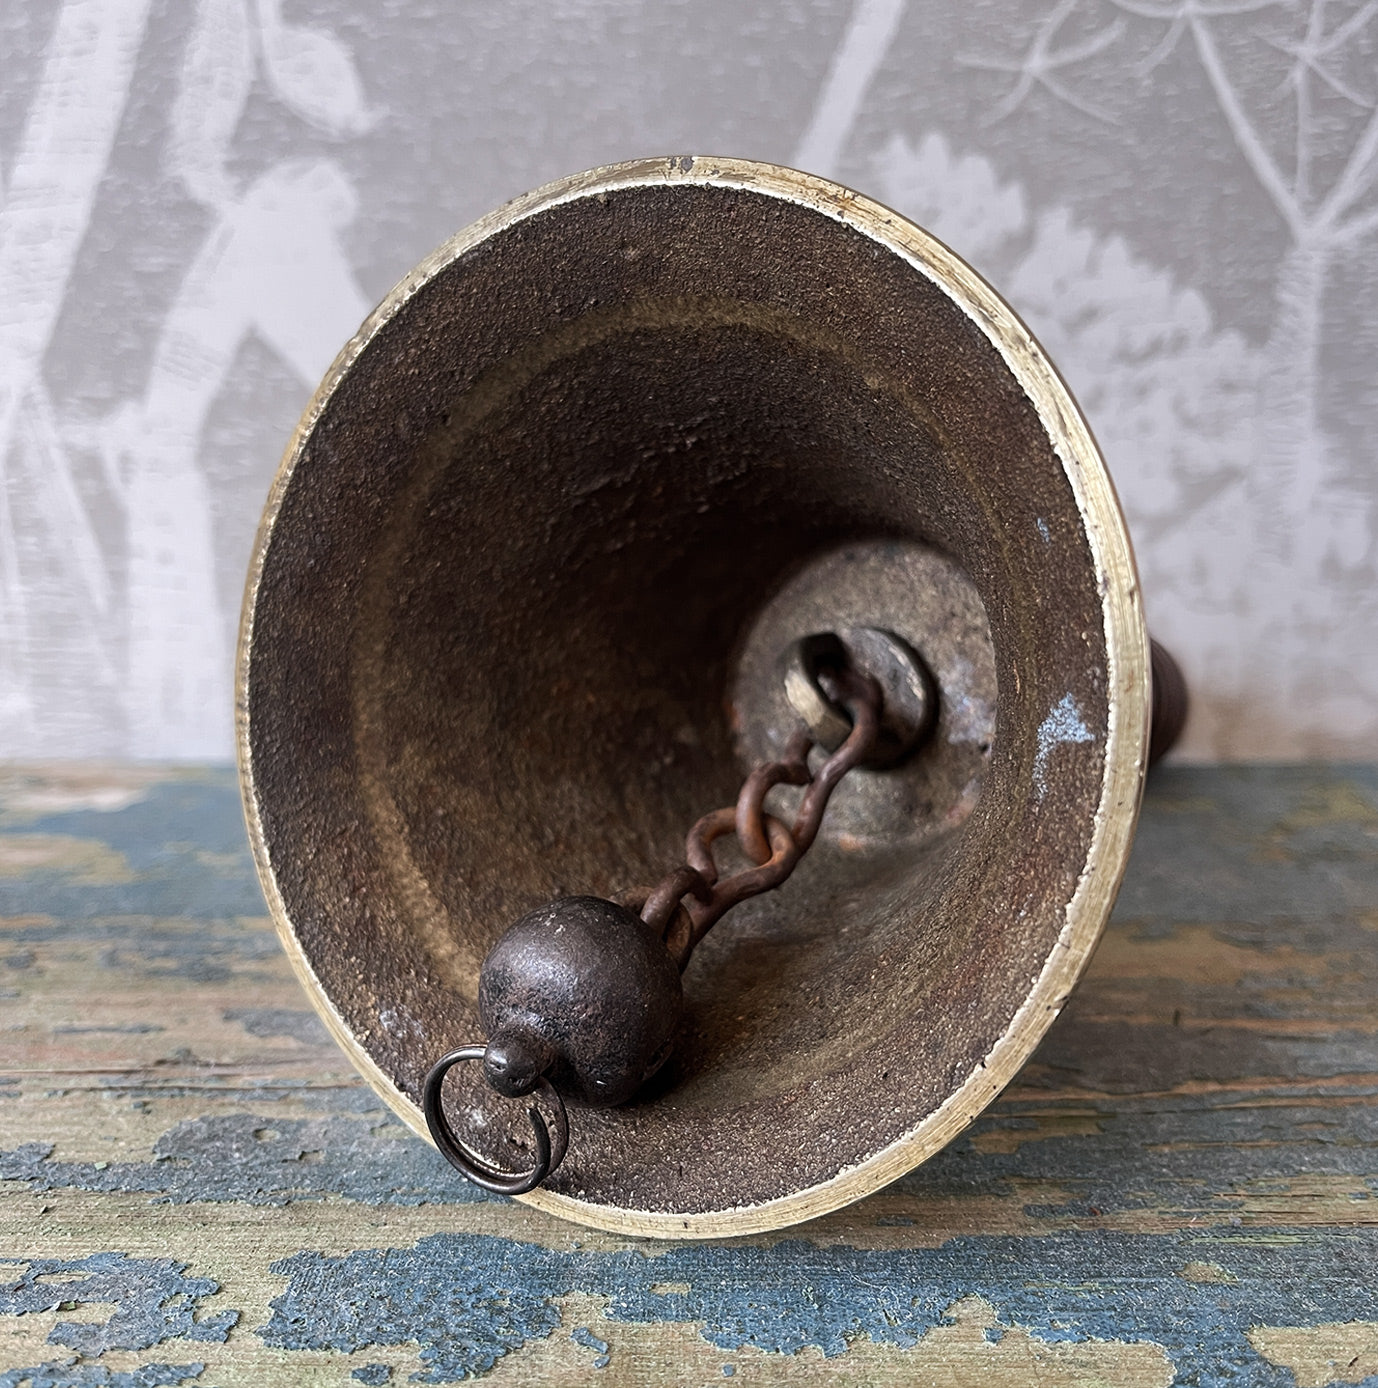 Old Brass School Bell inscribed 'From the Spastics Society with appreciative thanks', 'Time to help the Spastics'. Good quality brass and a solid mahogany handle - SHOP NOW - www.intovintage.co.uk